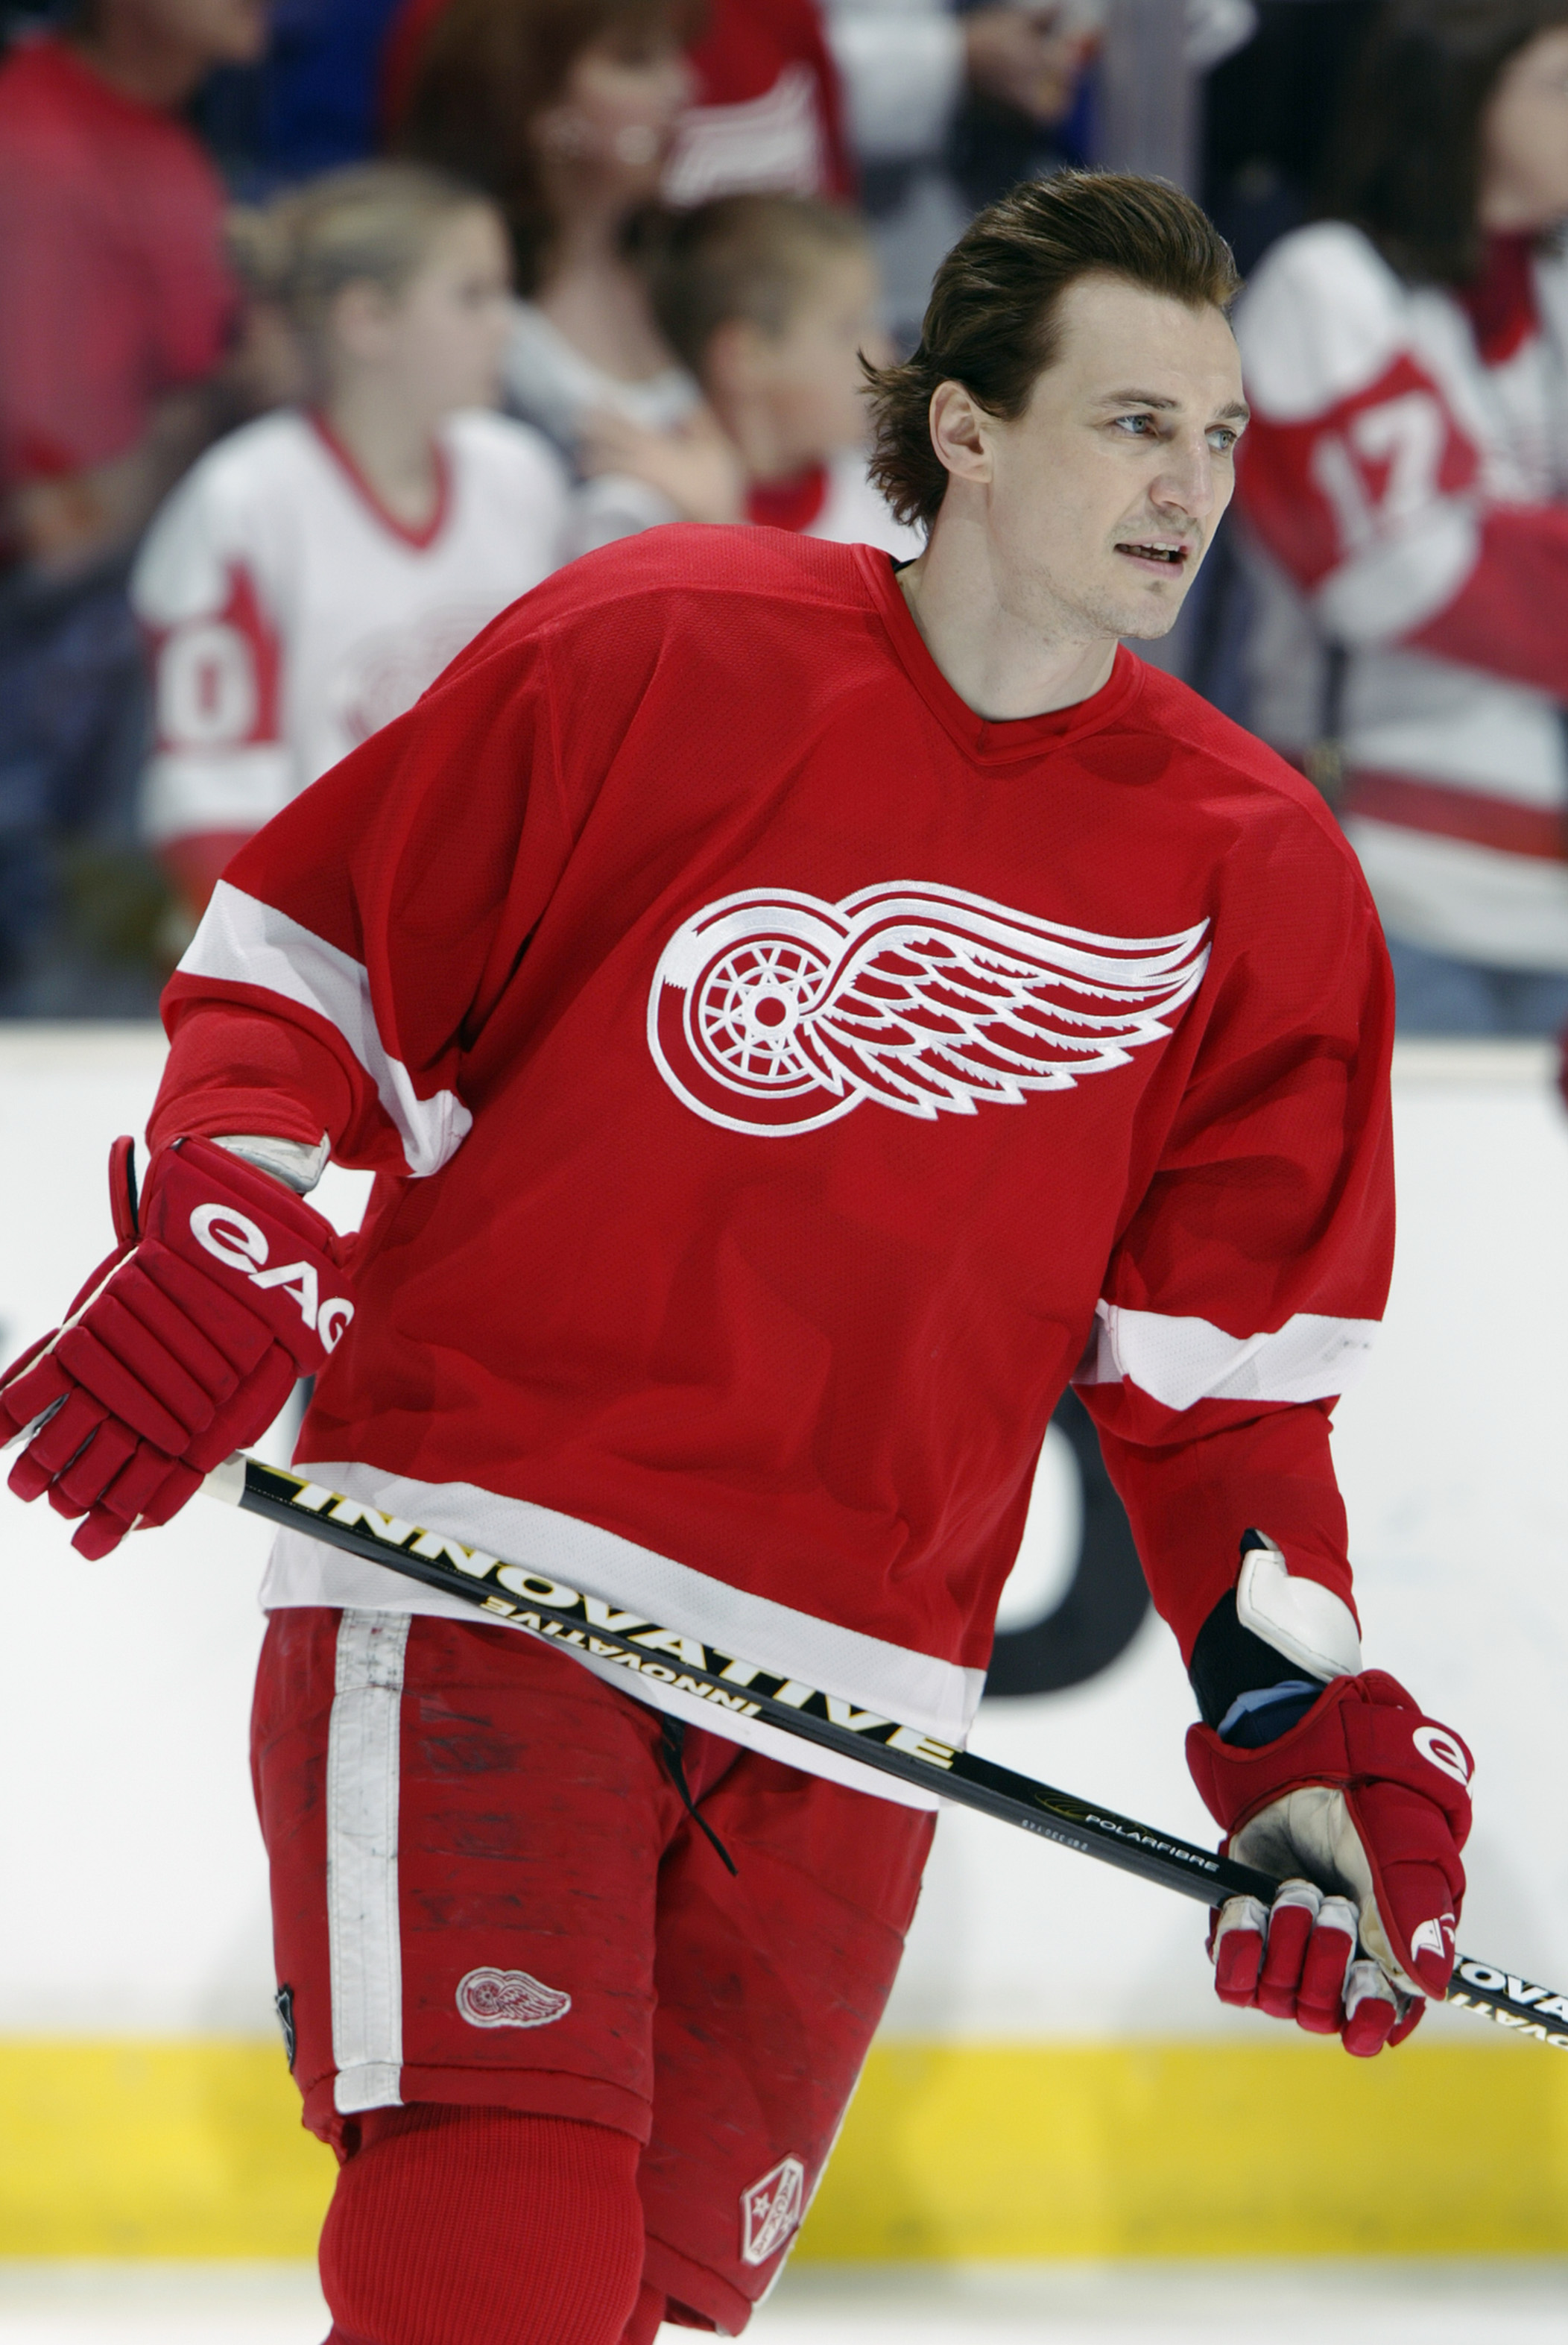 LOS ANGELES - MARCH 10:  Sergei Fedorov #91 of the Detroit Red Wings skates during warmups before the game against the Los Angeles Kings on March 10, 2003 at the Staples Center in Los Angeles, California.  The Red Wings defeated the Kings 3-2.  (Photo by